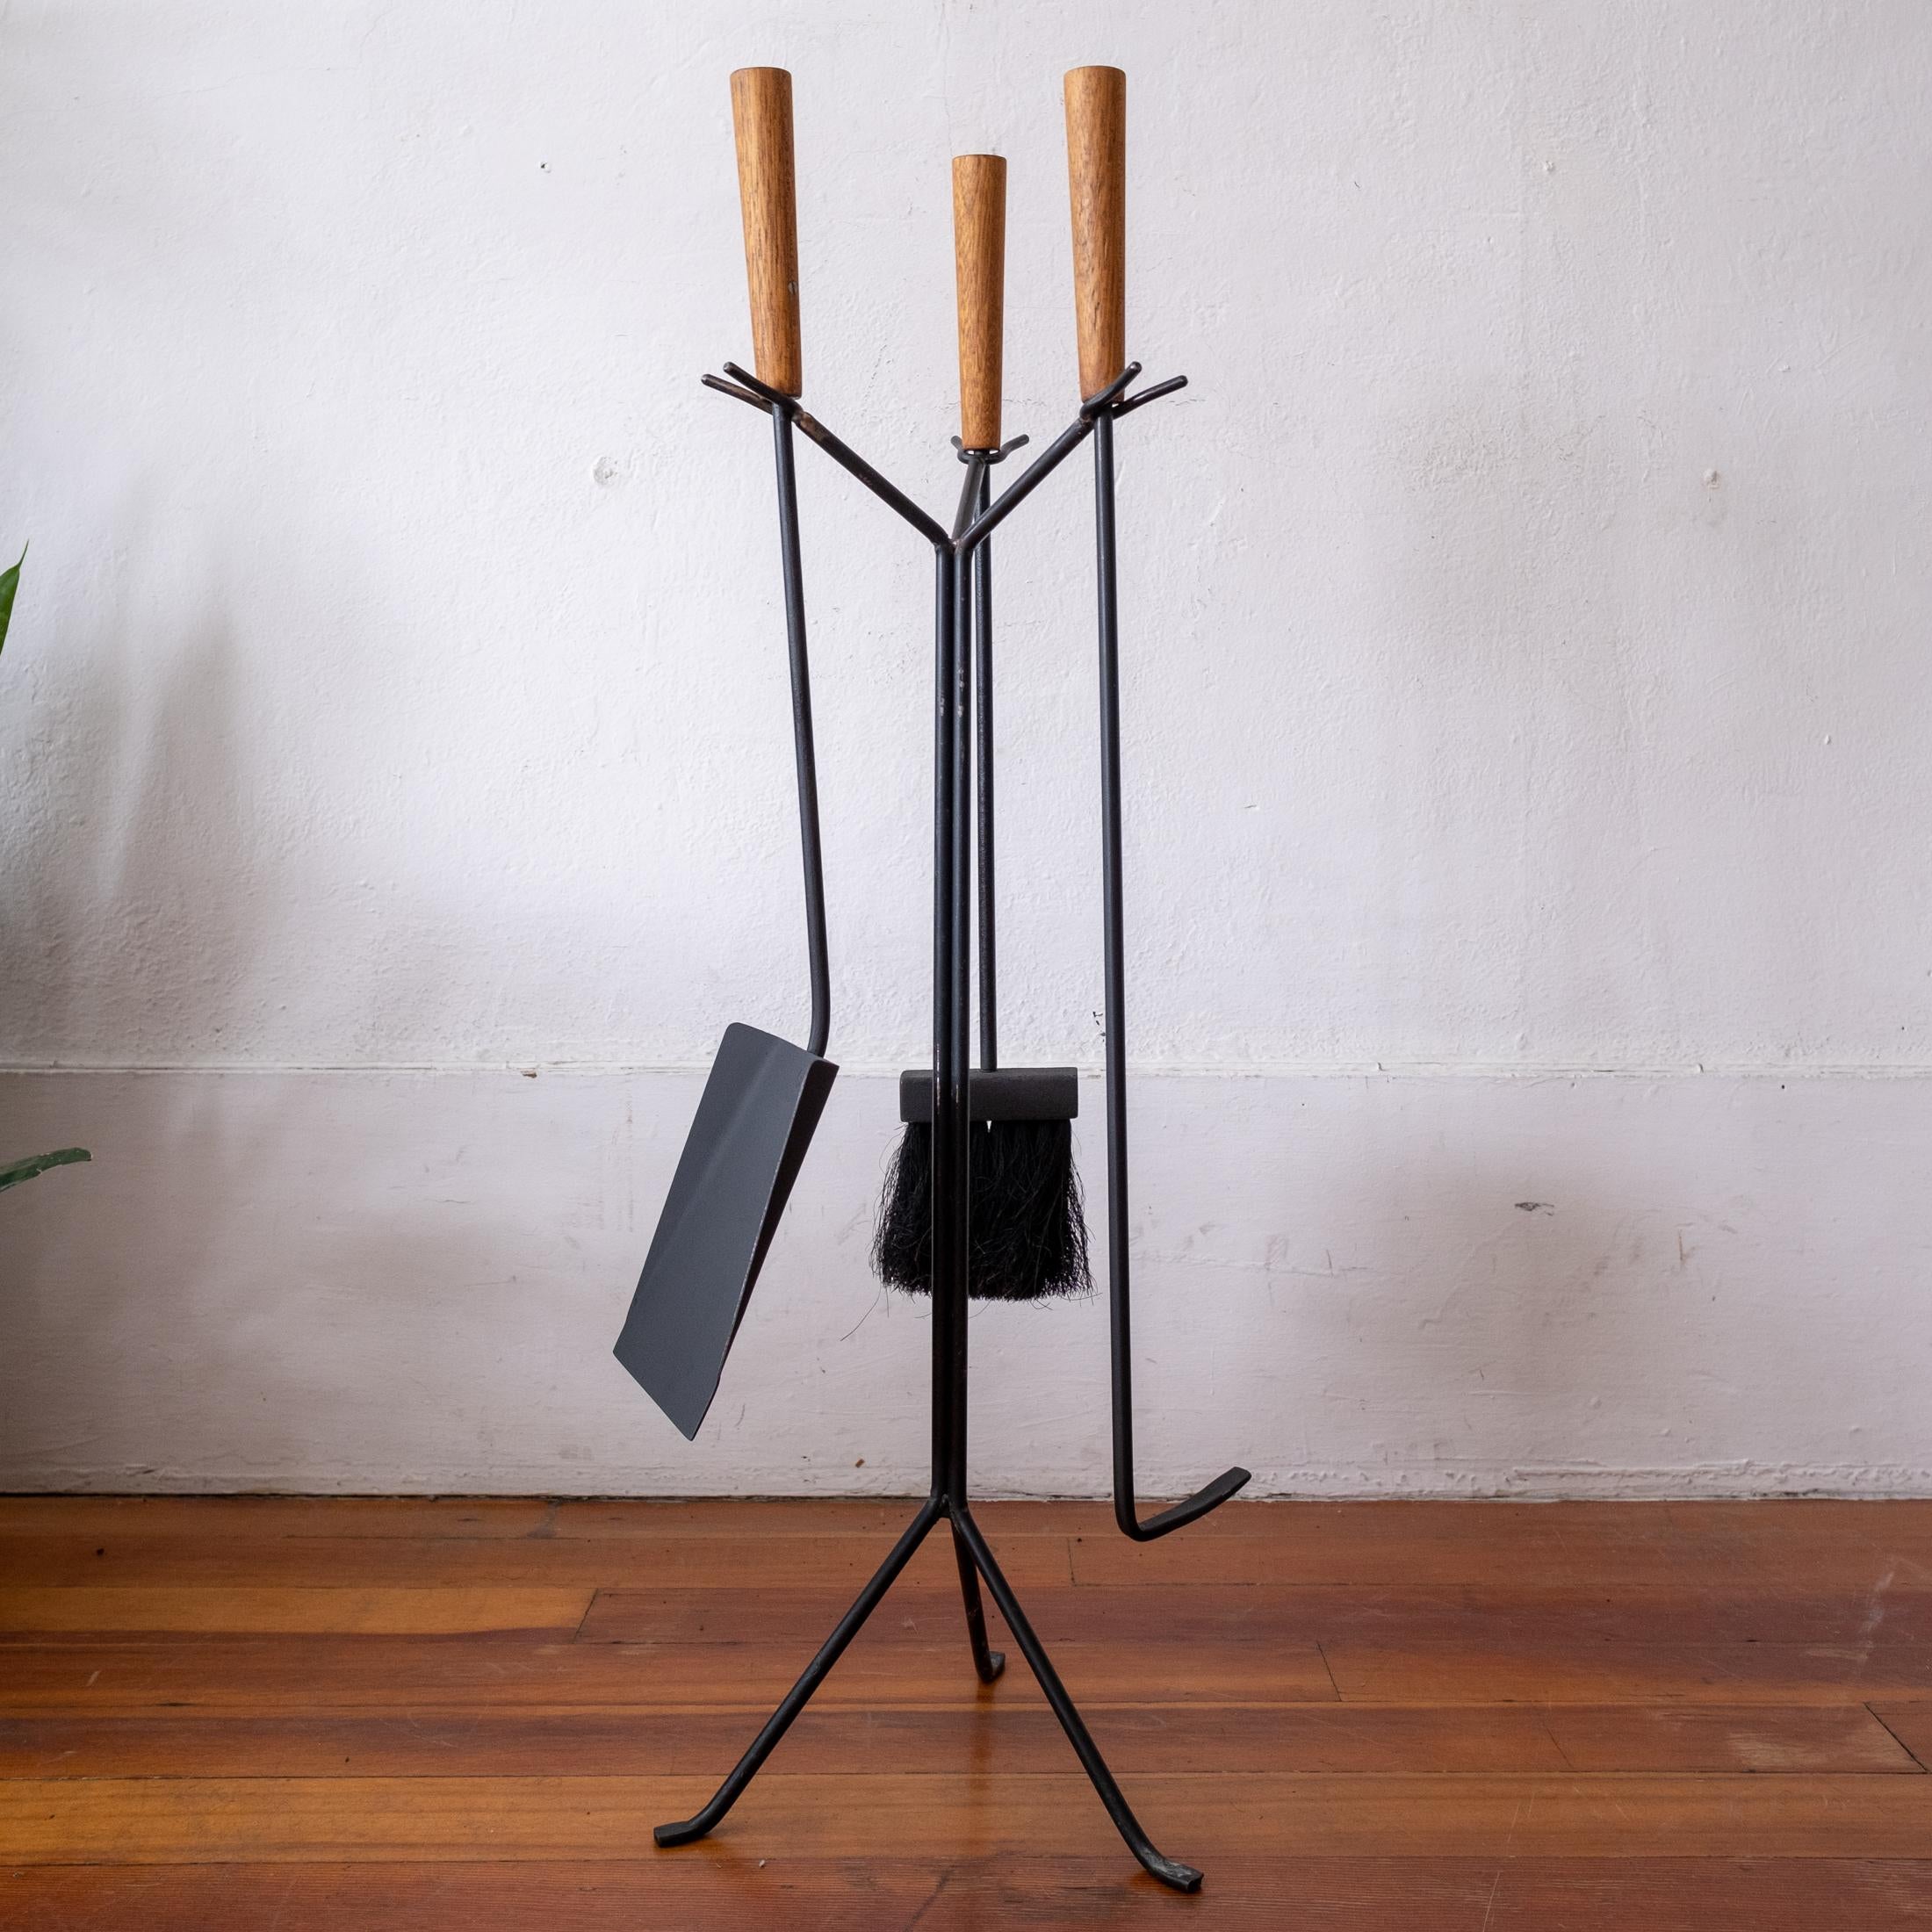 A nice small-scale modernist iron and wood fireplace tool set from the 1950s.